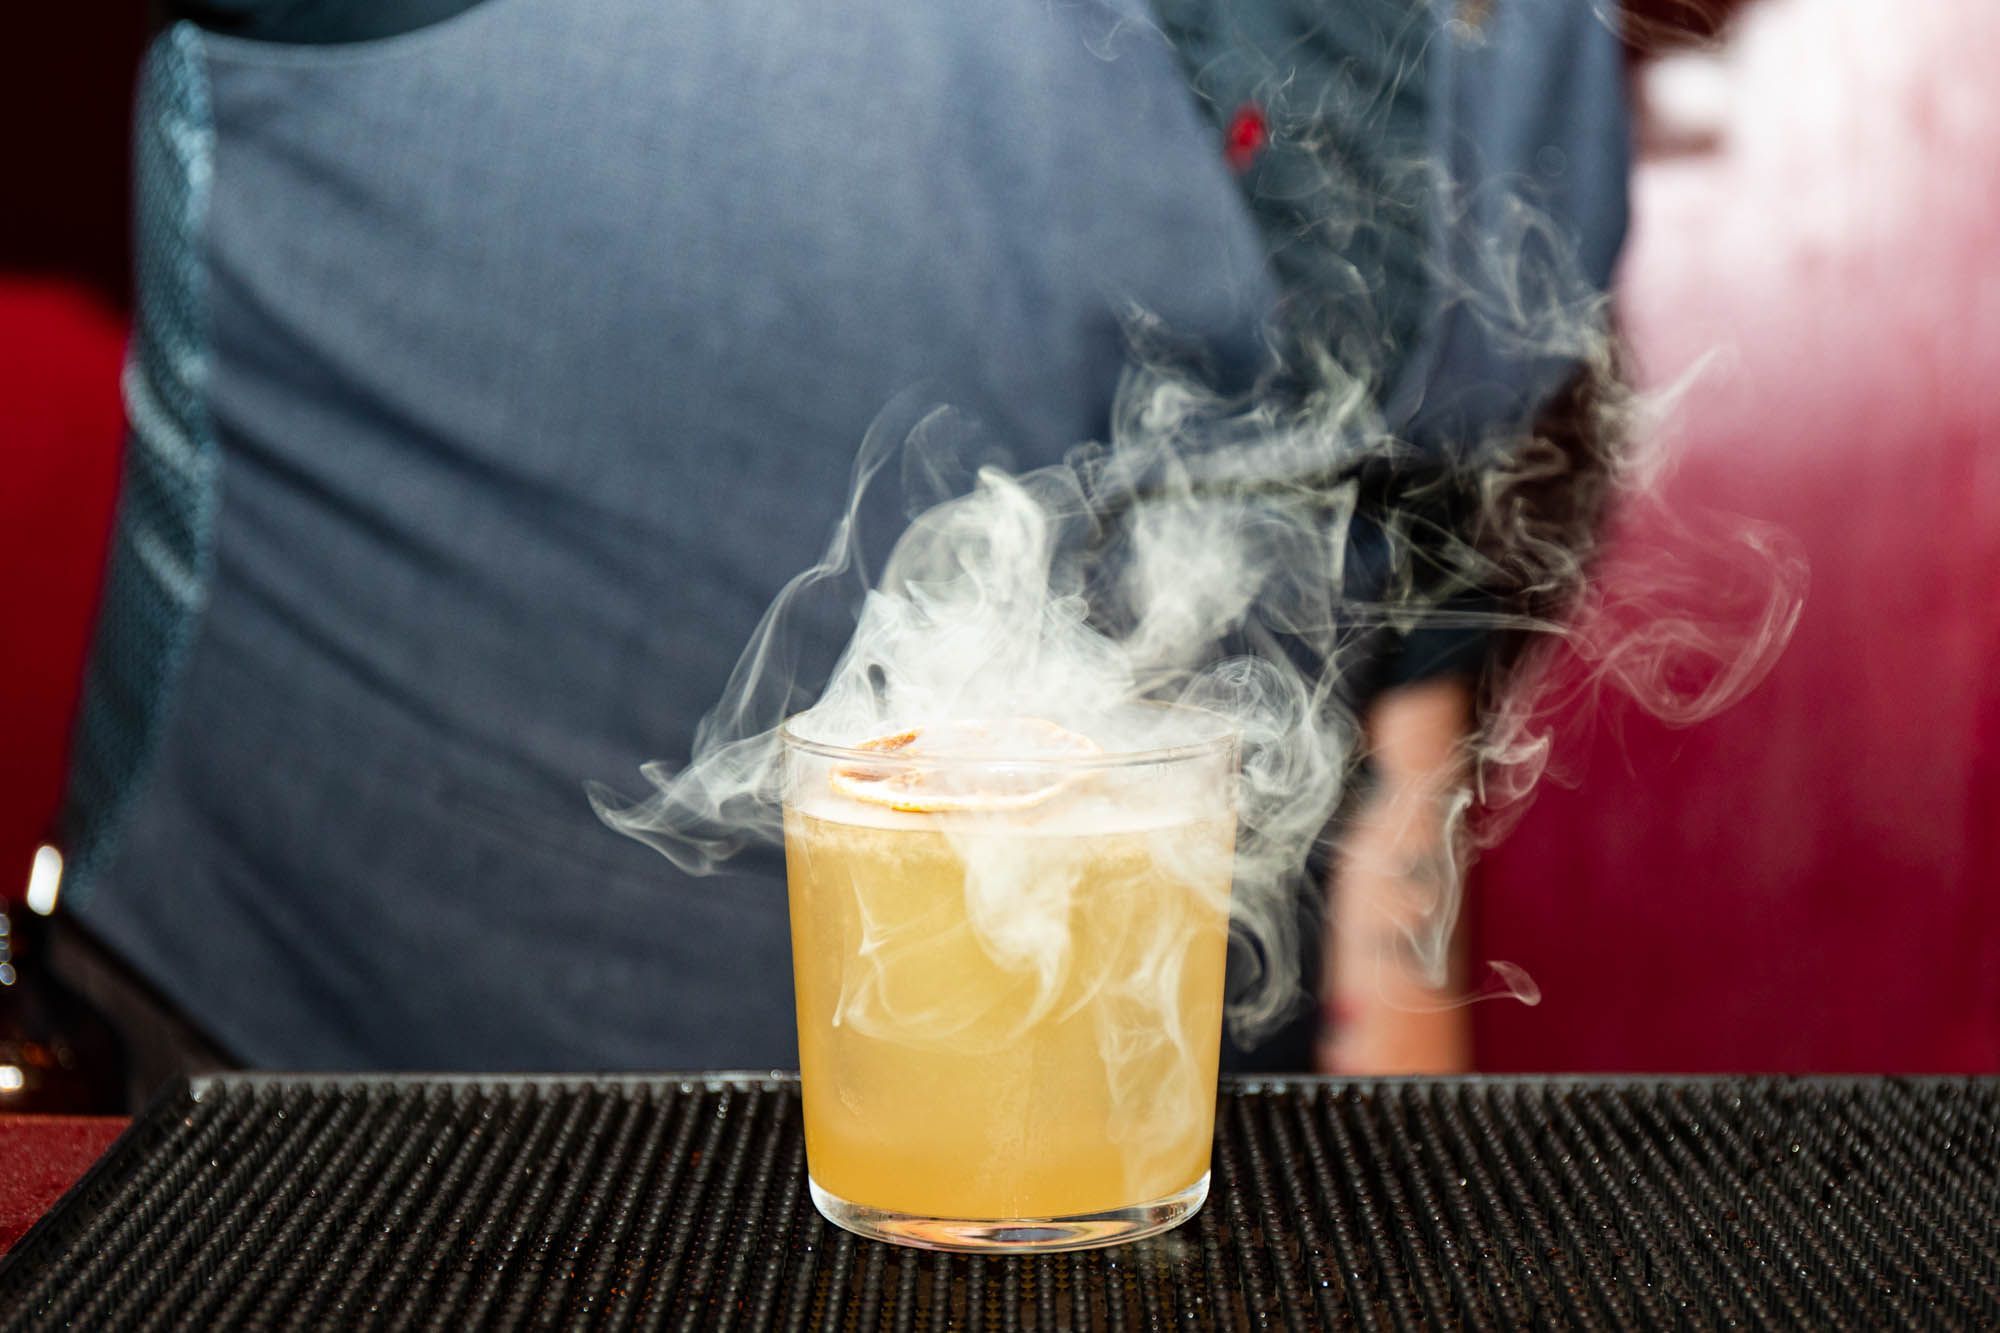 close up shot of the yellow cocktail and smoke coming out of it